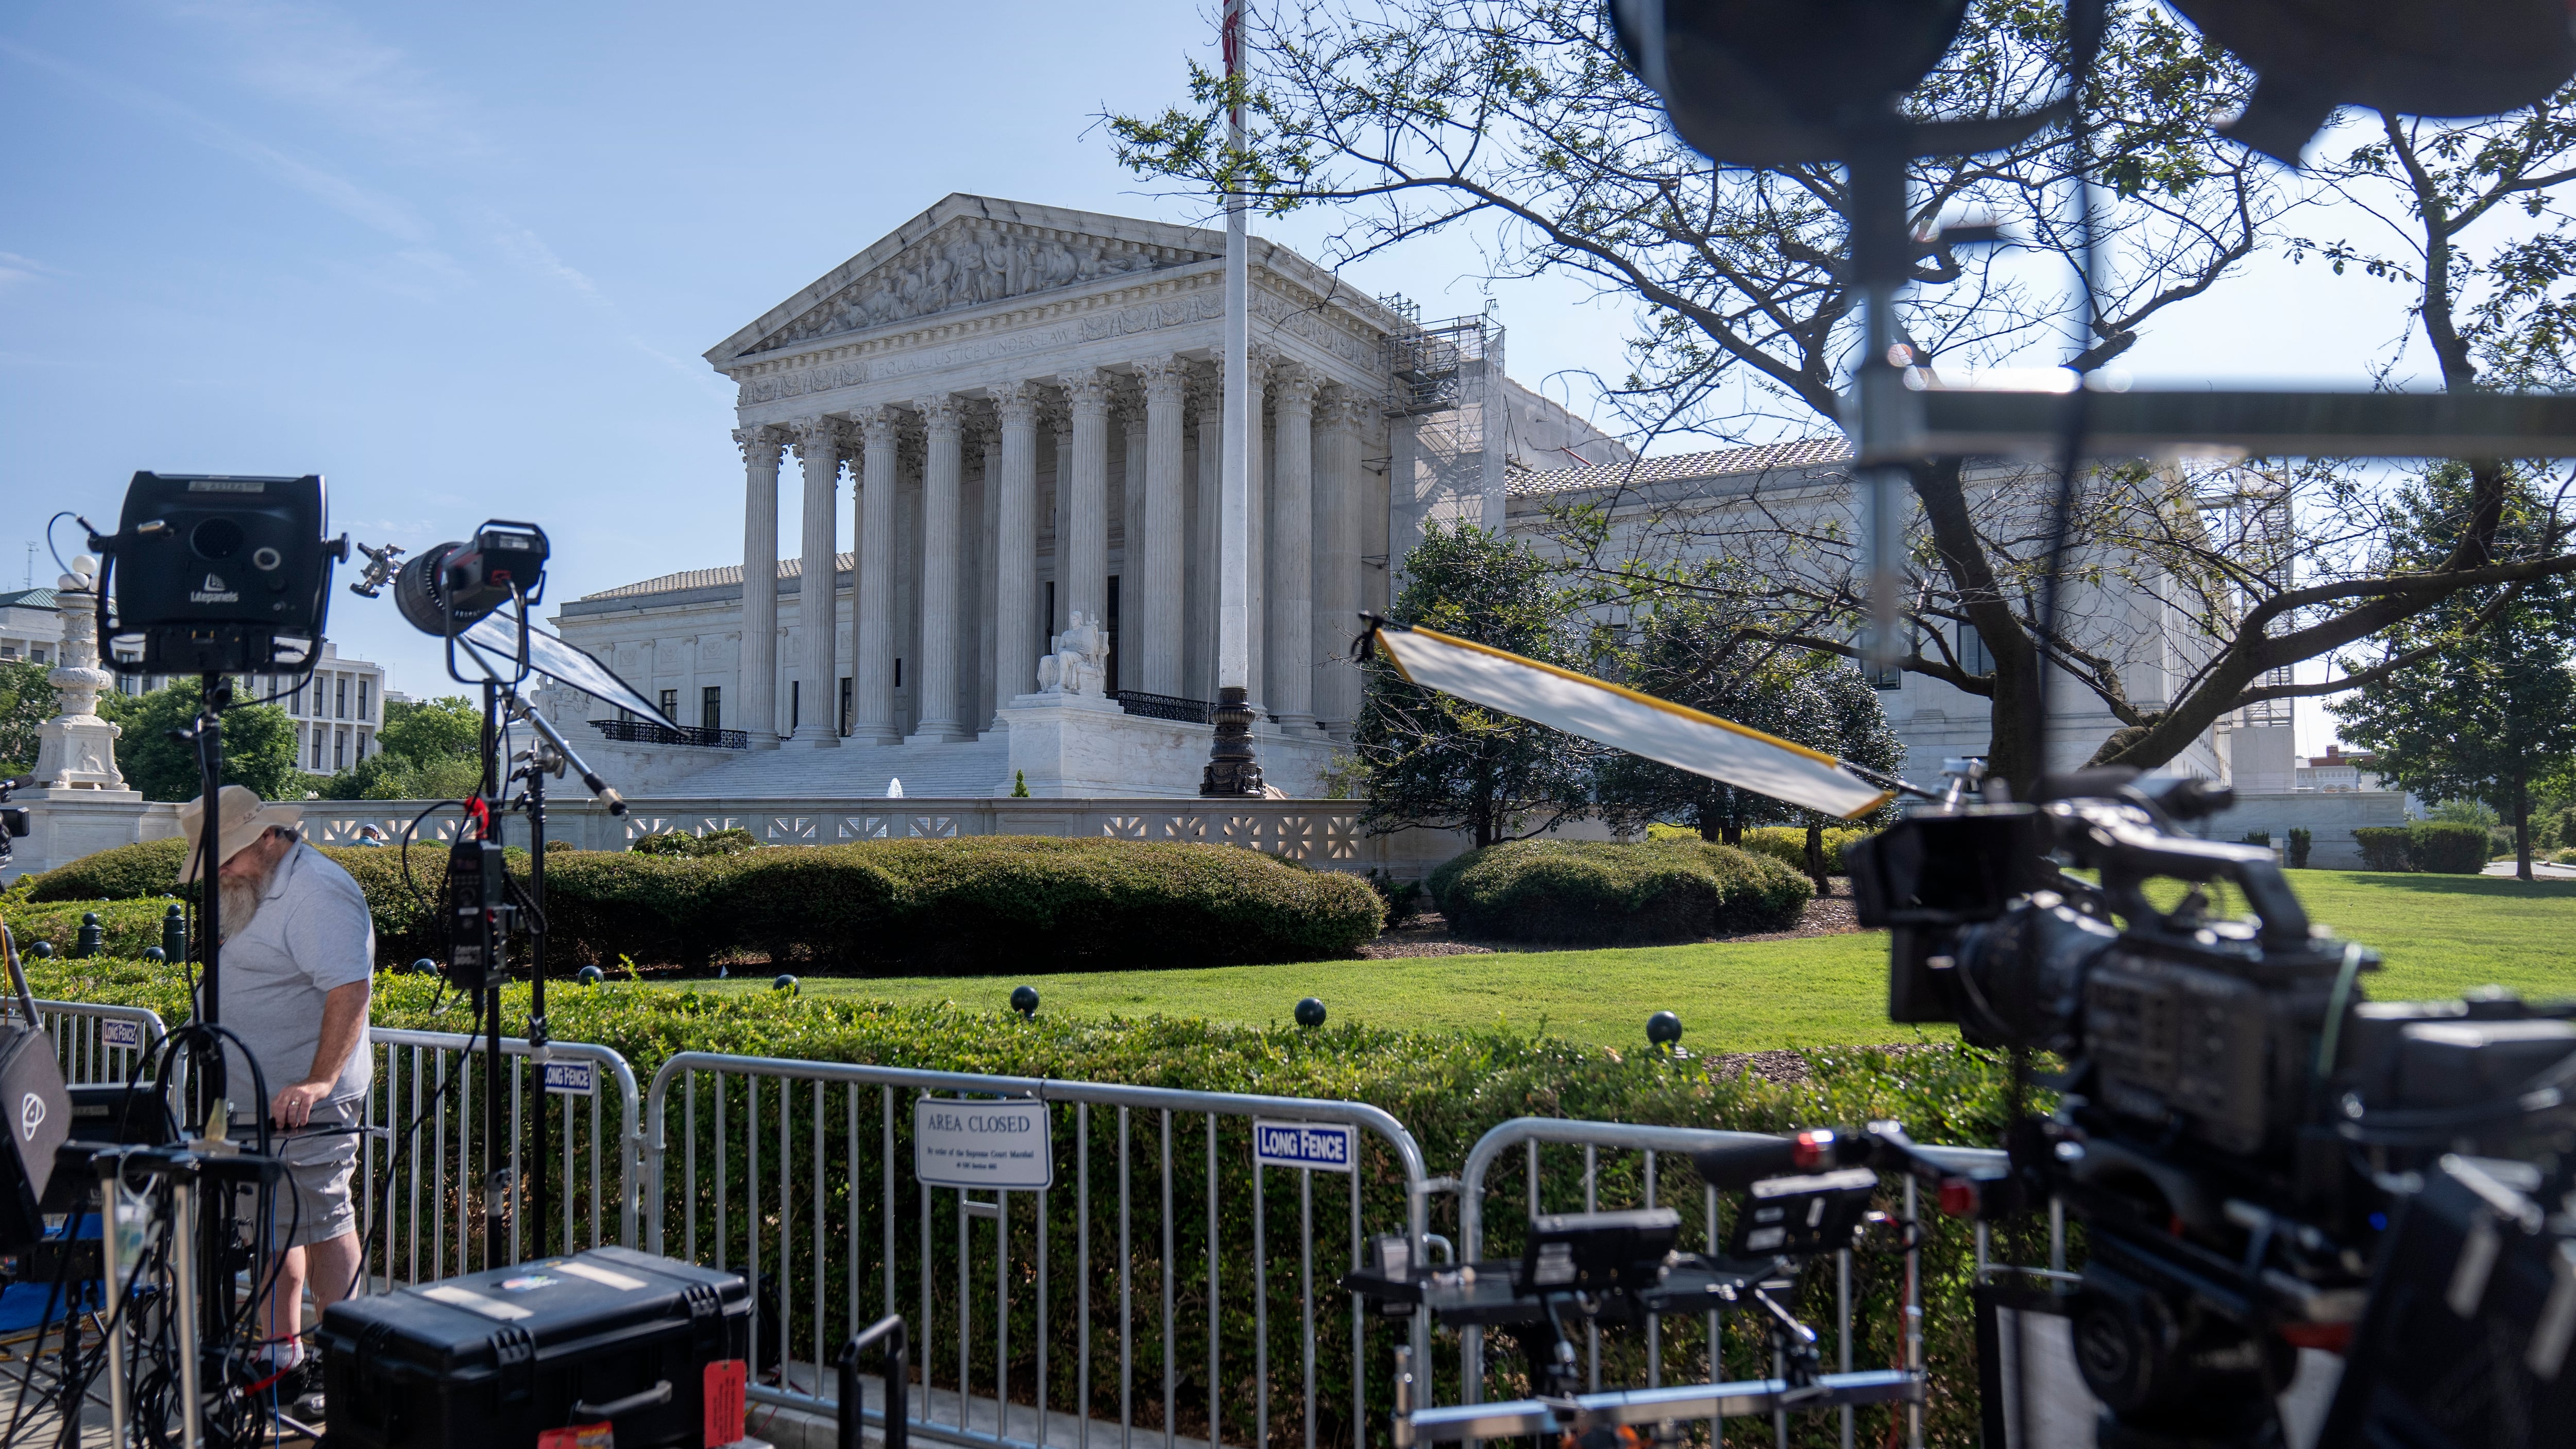 The Supreme Court in Washington ruled on the charge of obstruction in relation to the January 6 riot (Mark Schiefelbein/AP)